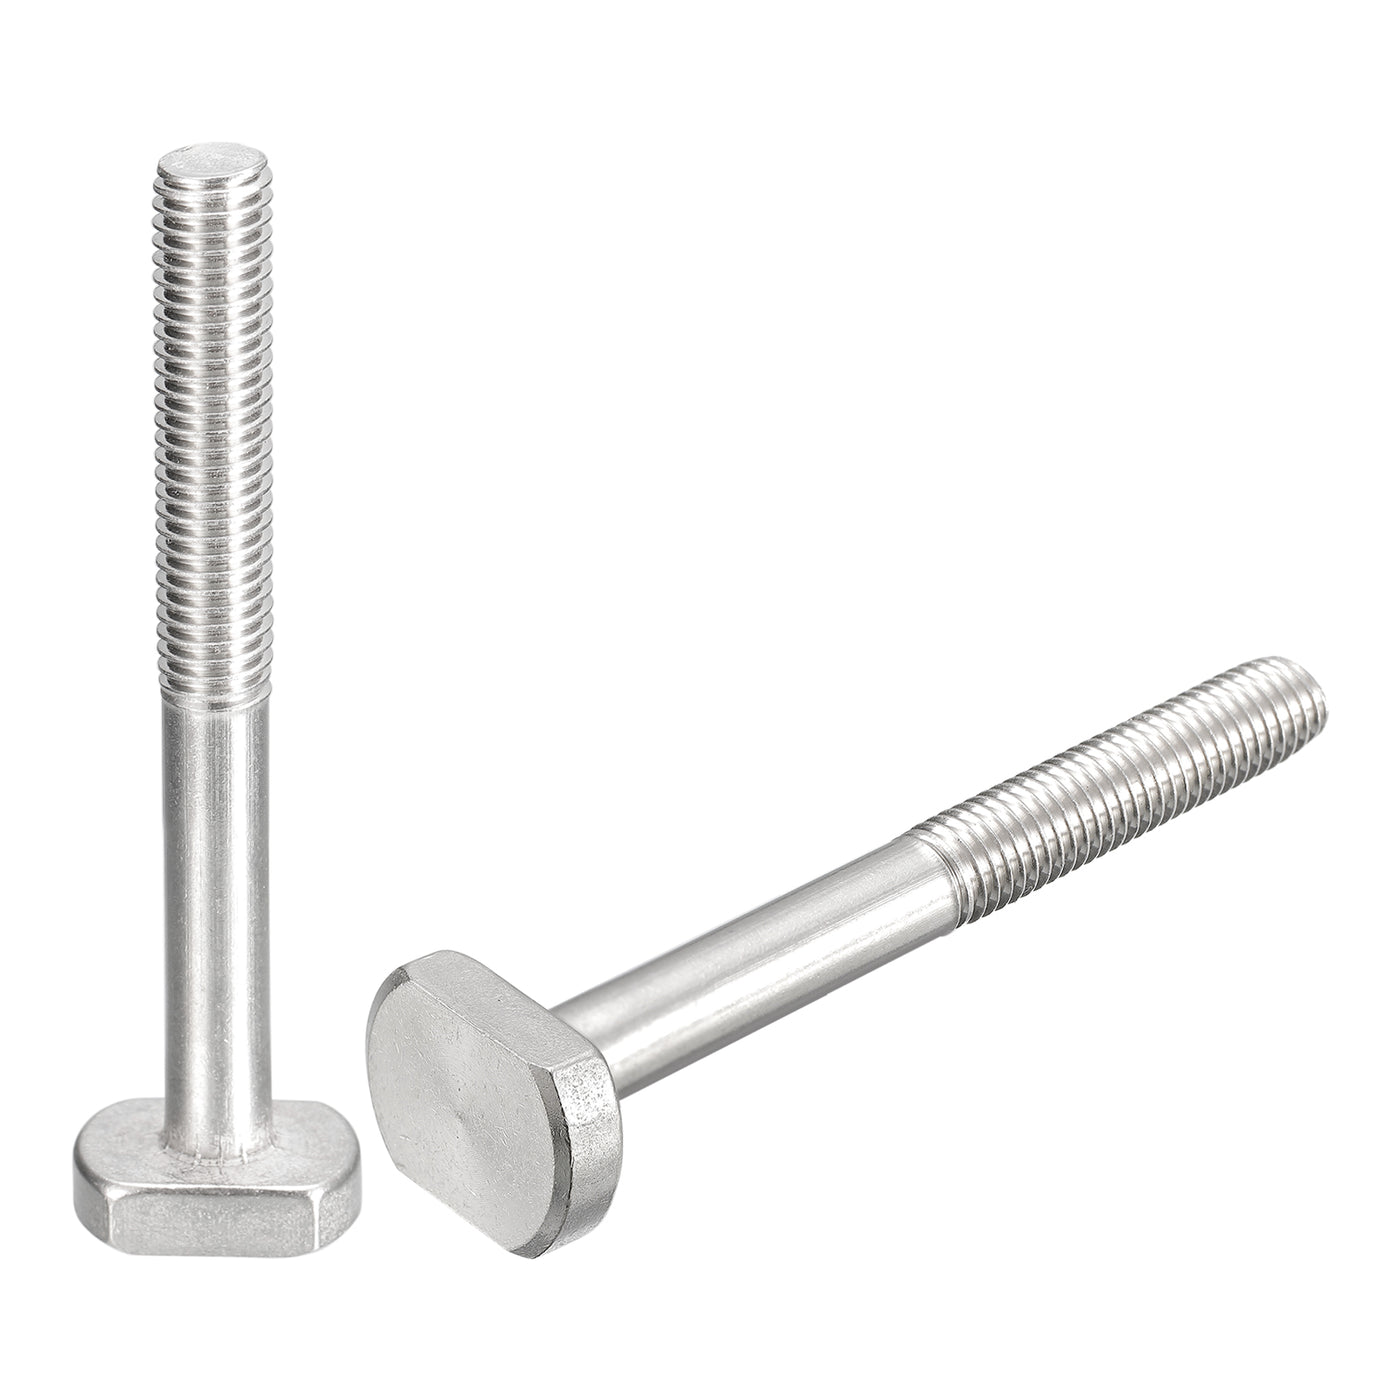 uxcell Uxcell T-Slot Bolts, 2pcs M10x90mm Drop-in Stud Sliding Bolts 304 Stainless Steel